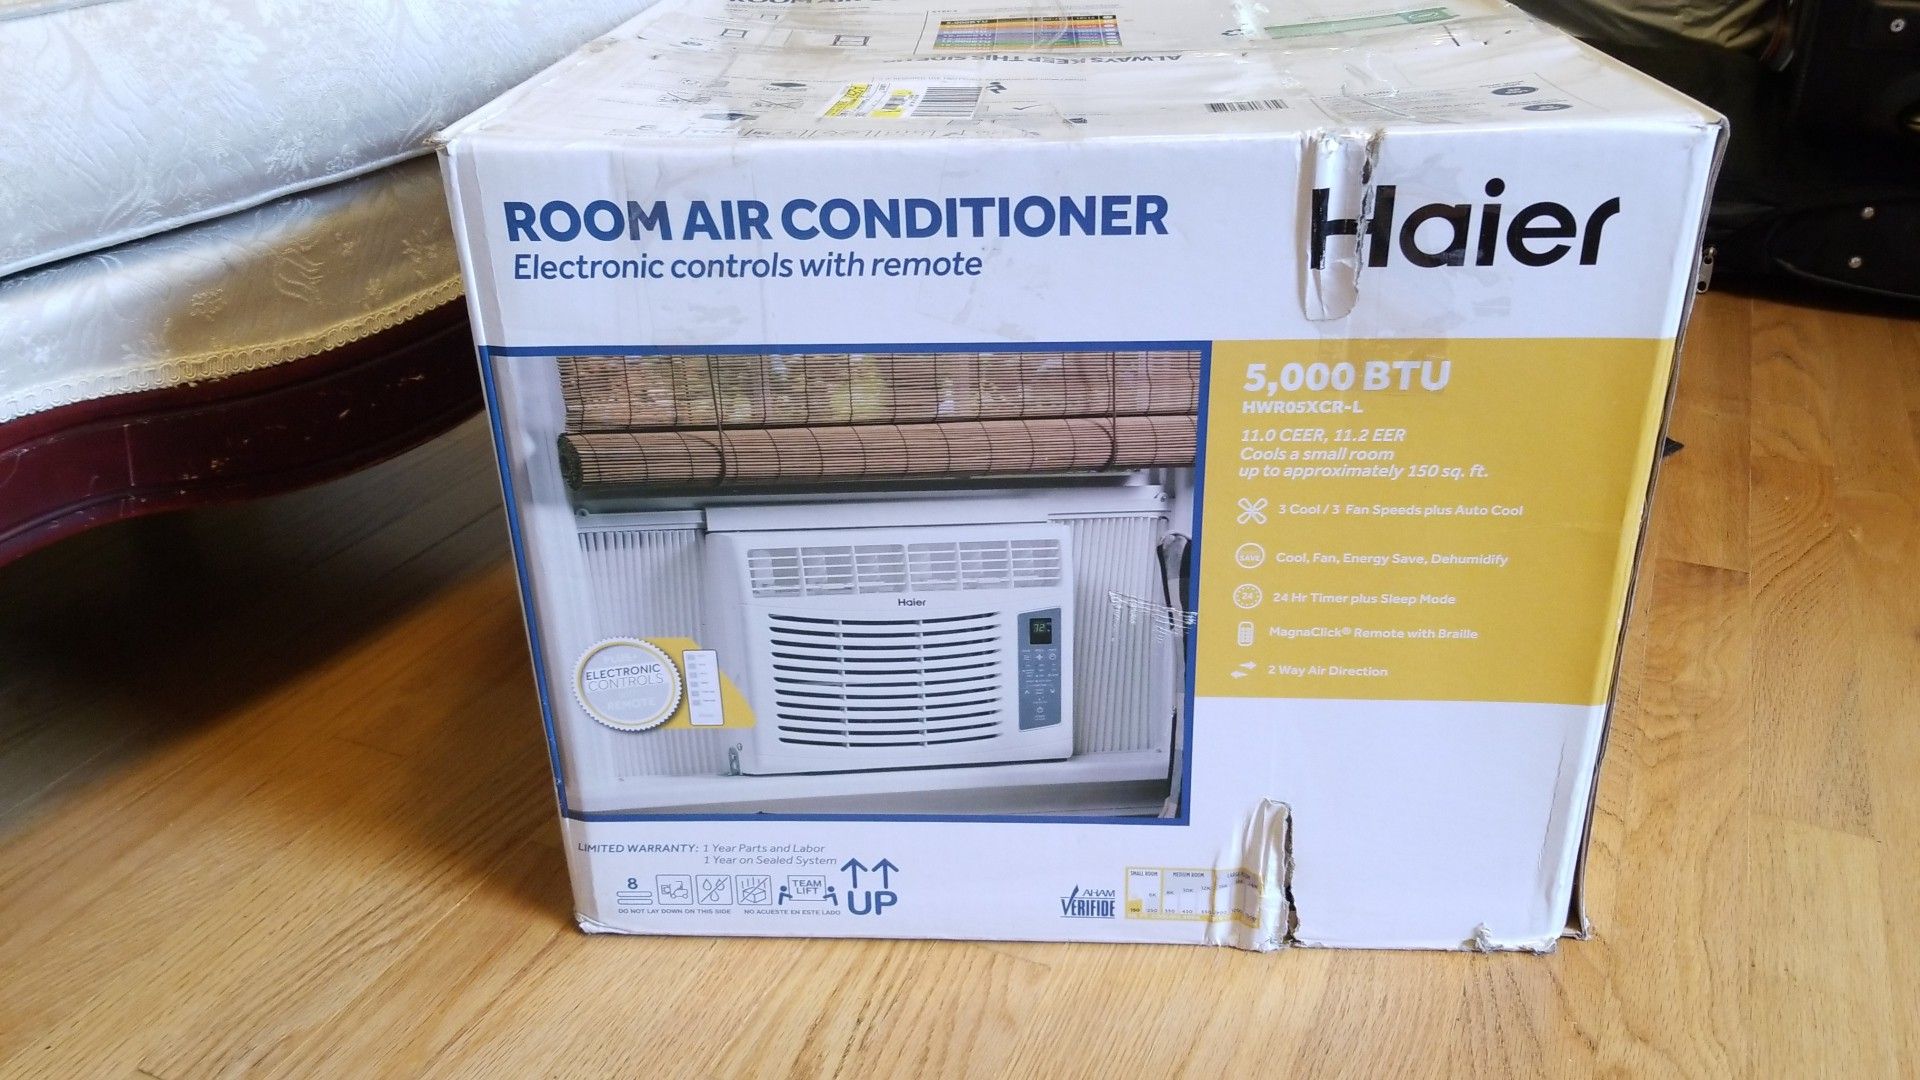 Air Conditioner now in Wyoming location won't change on app